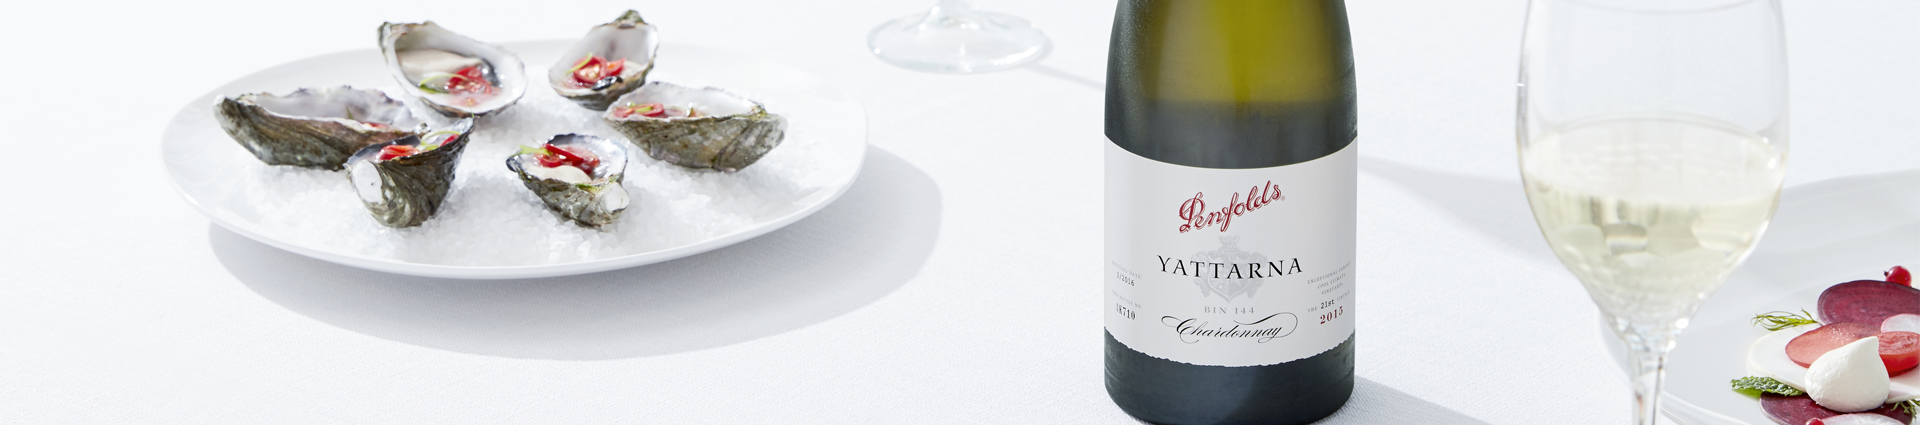 Bottle of Yattarna Chardonnay centred on a white tablecloth.  A glass to the right and a plate of oysters to the left.